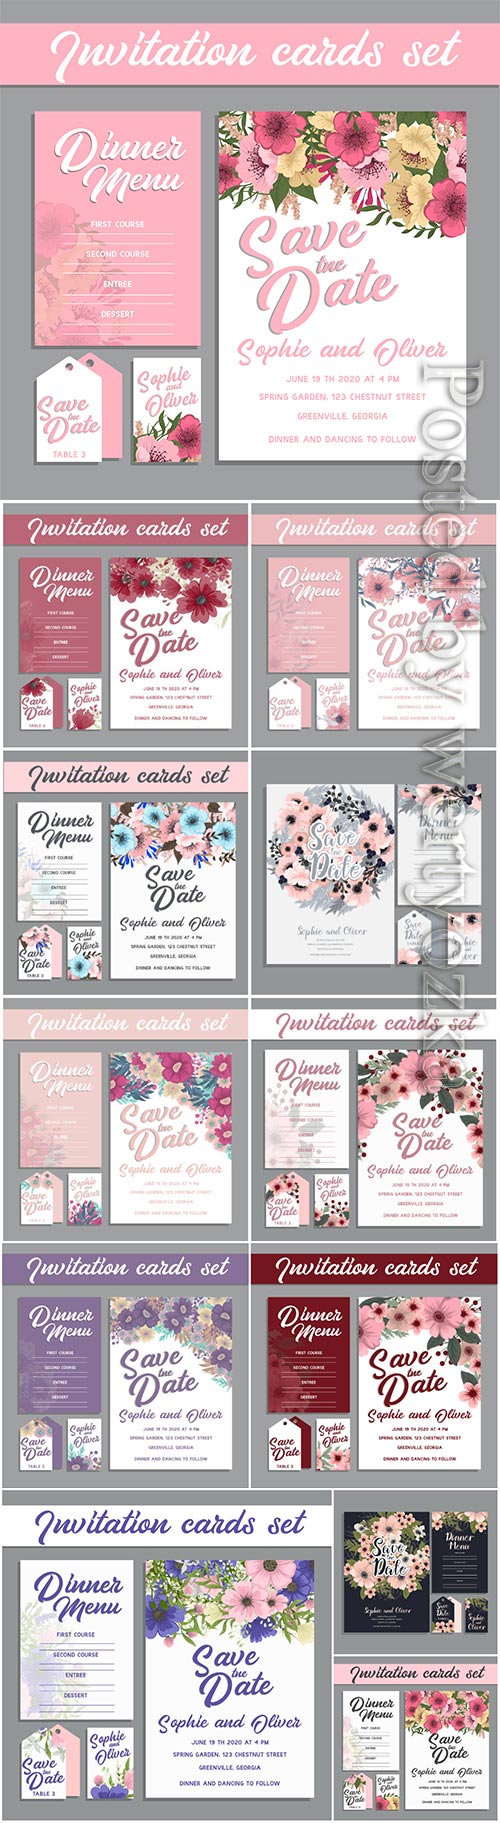 Wedding invitation card suite with flowers, template vector illustration